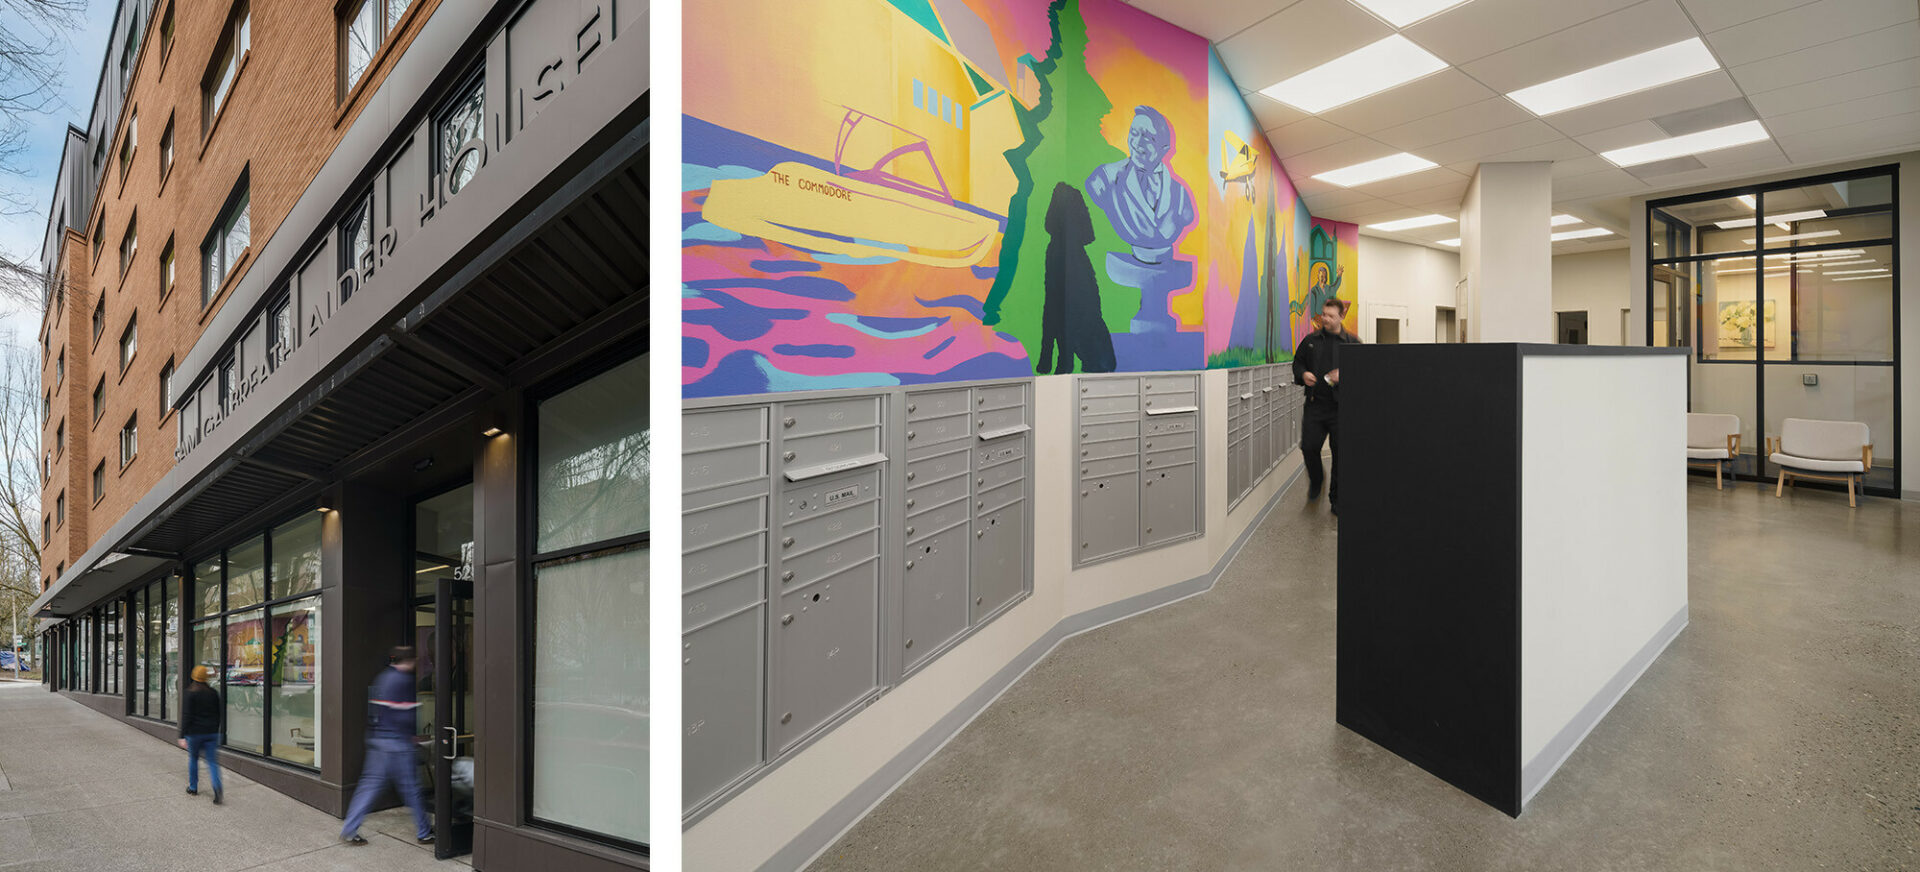 Two images side by side. The left shows the exterior entrance of a building with floor to ceiling windows on the first story. The other photo shows the interior entrance into a large mail room with murals covering the walls.